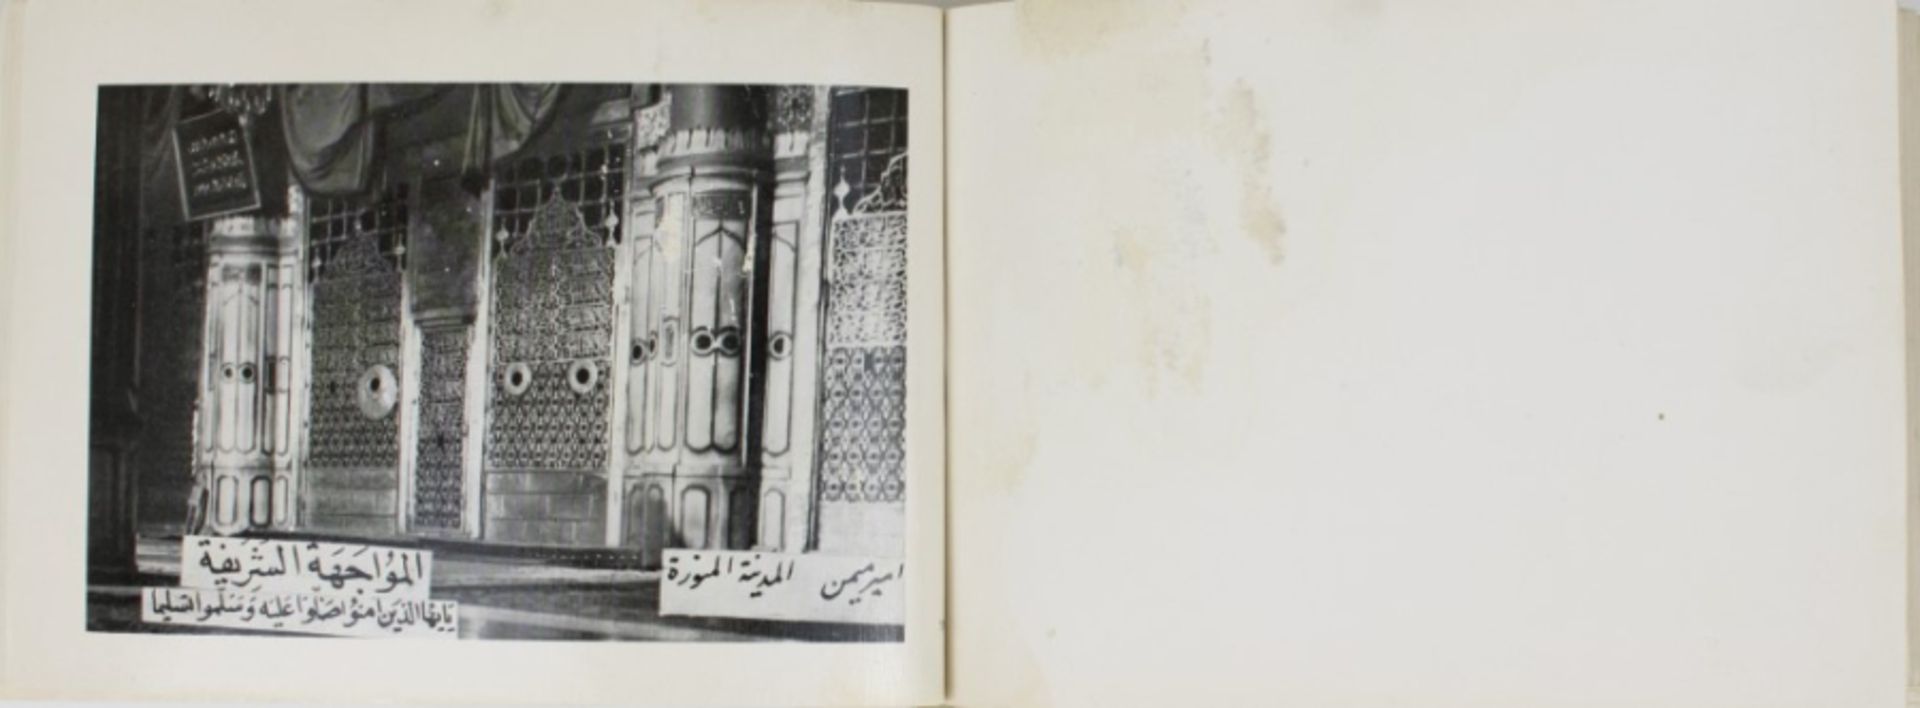 1930 Album with photographs of Mecca - Image 17 of 24